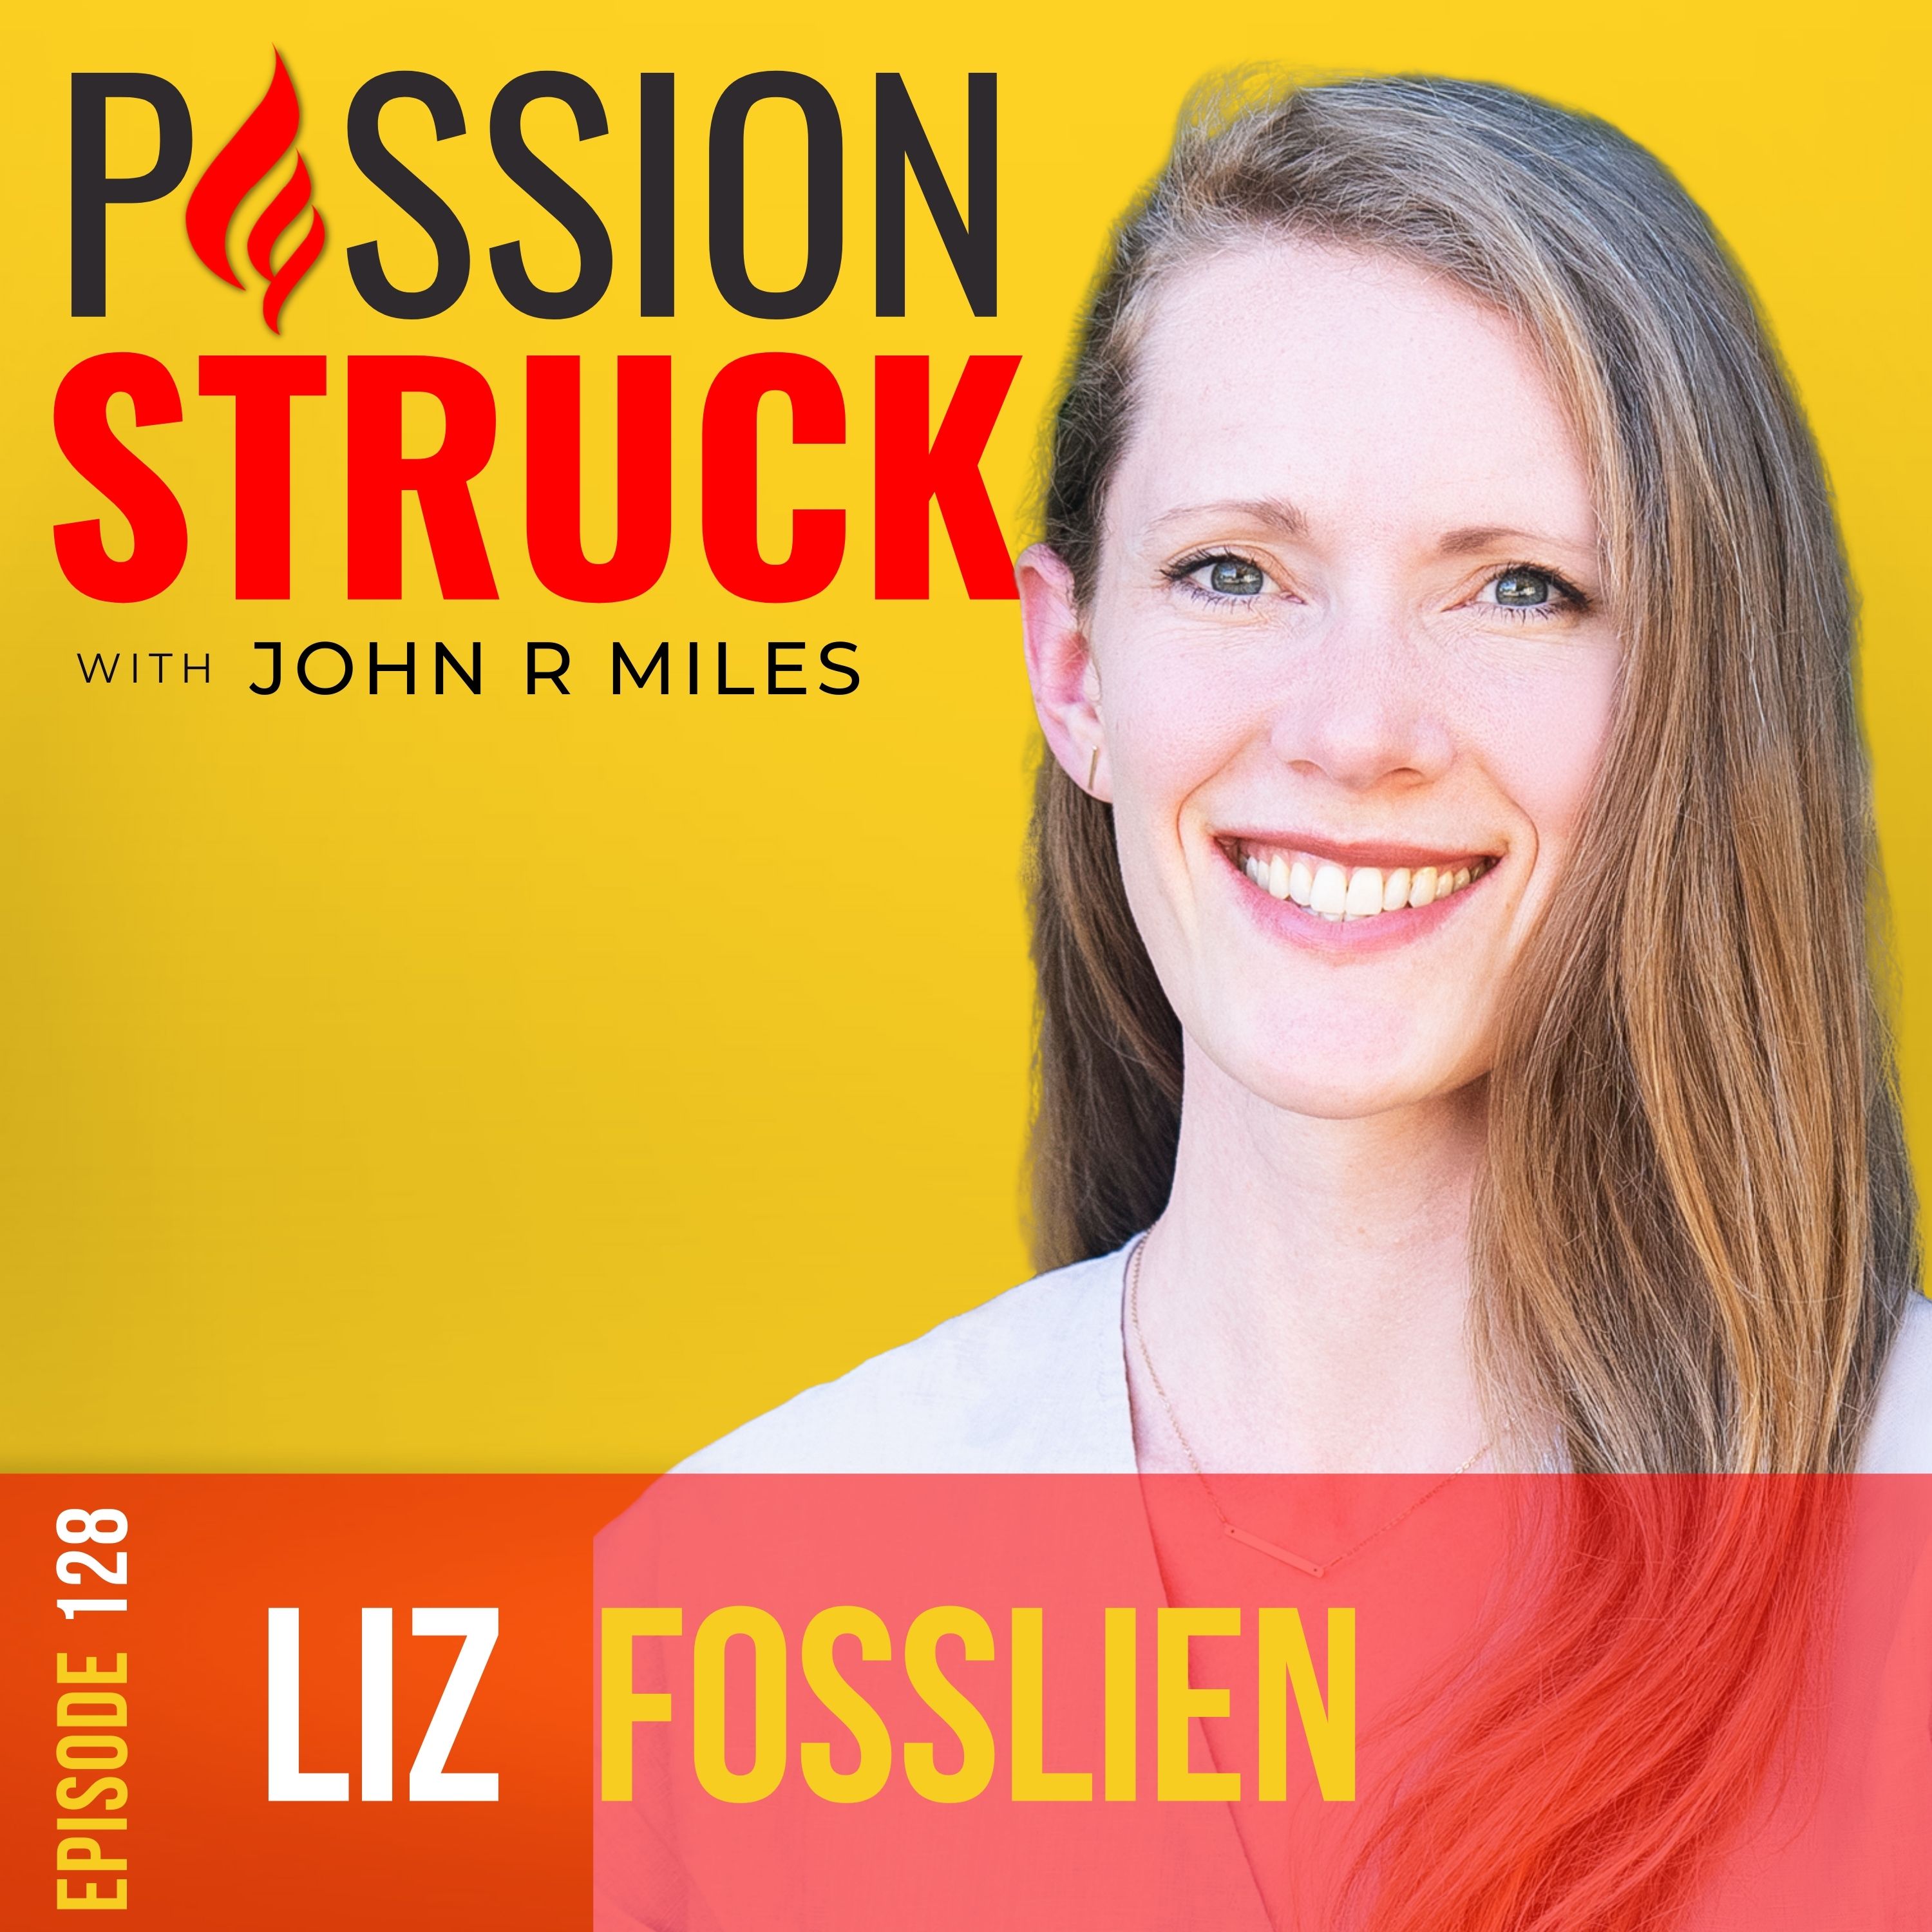 passion struck with John R. Miles album cover for episode 128 with Liz Fosslien on big feelings